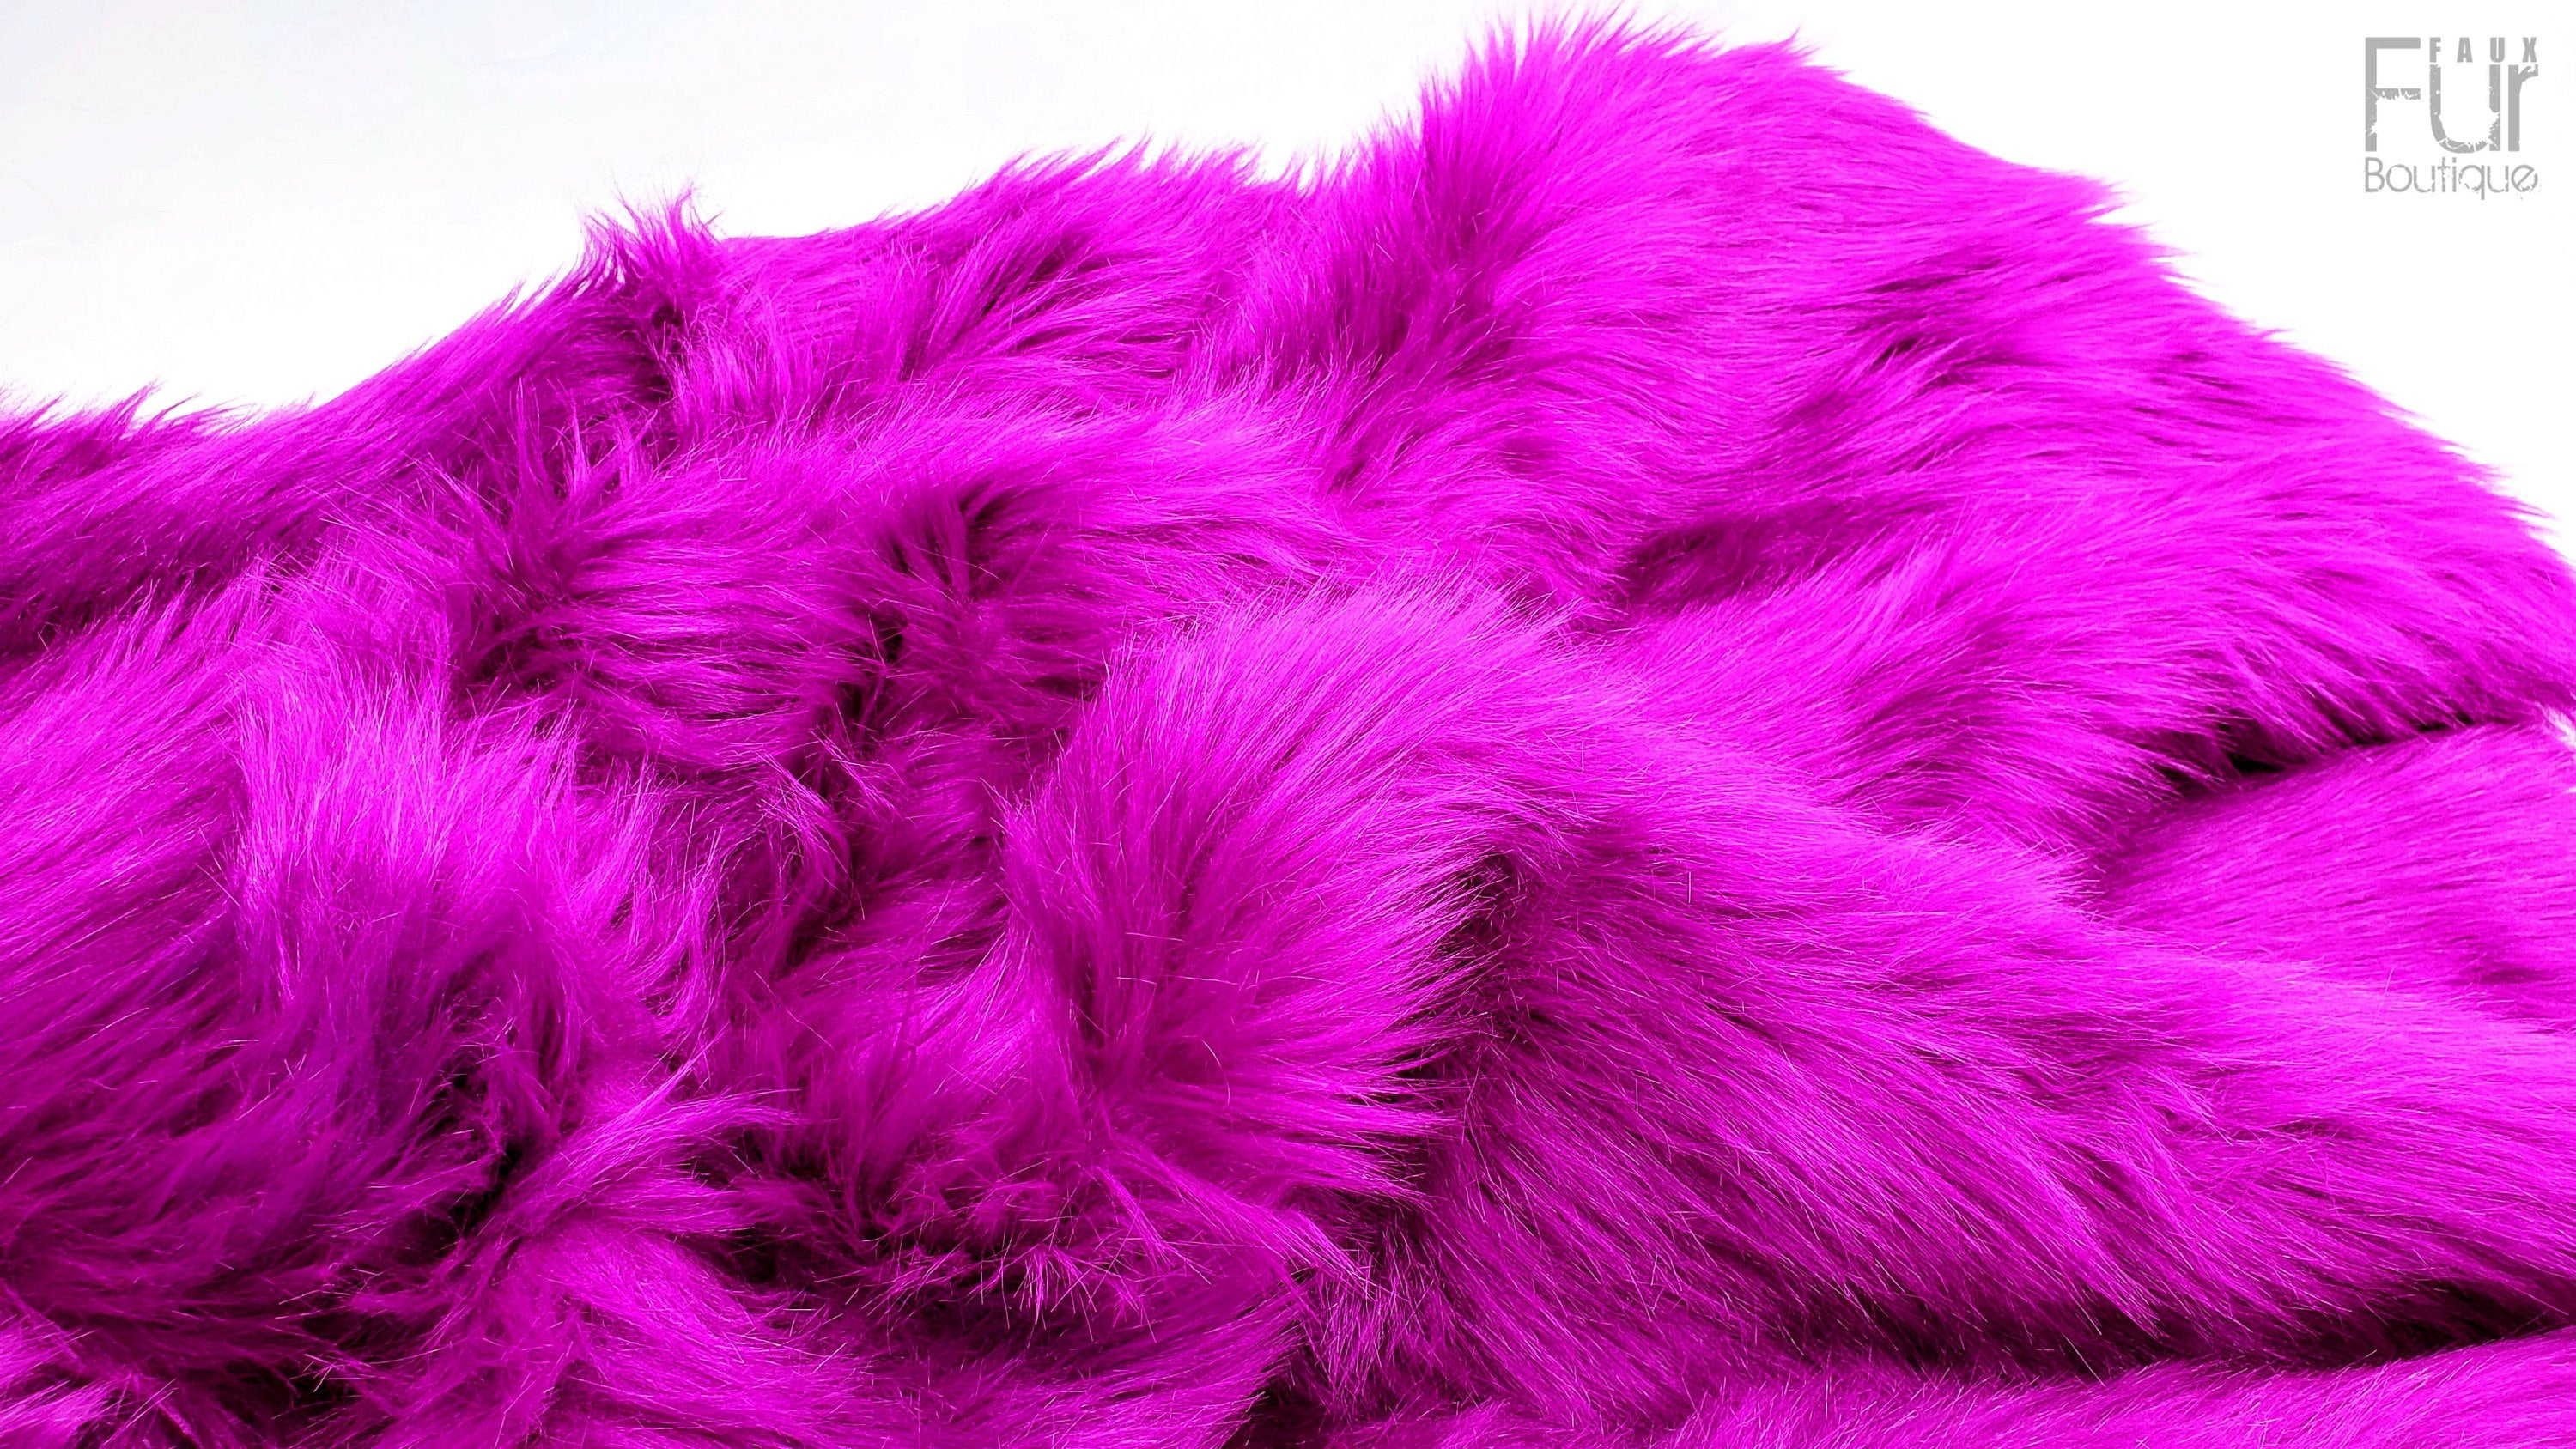 RED Luxury Faux Fur, First Class Extra Long Pile Faux Fur Fabric